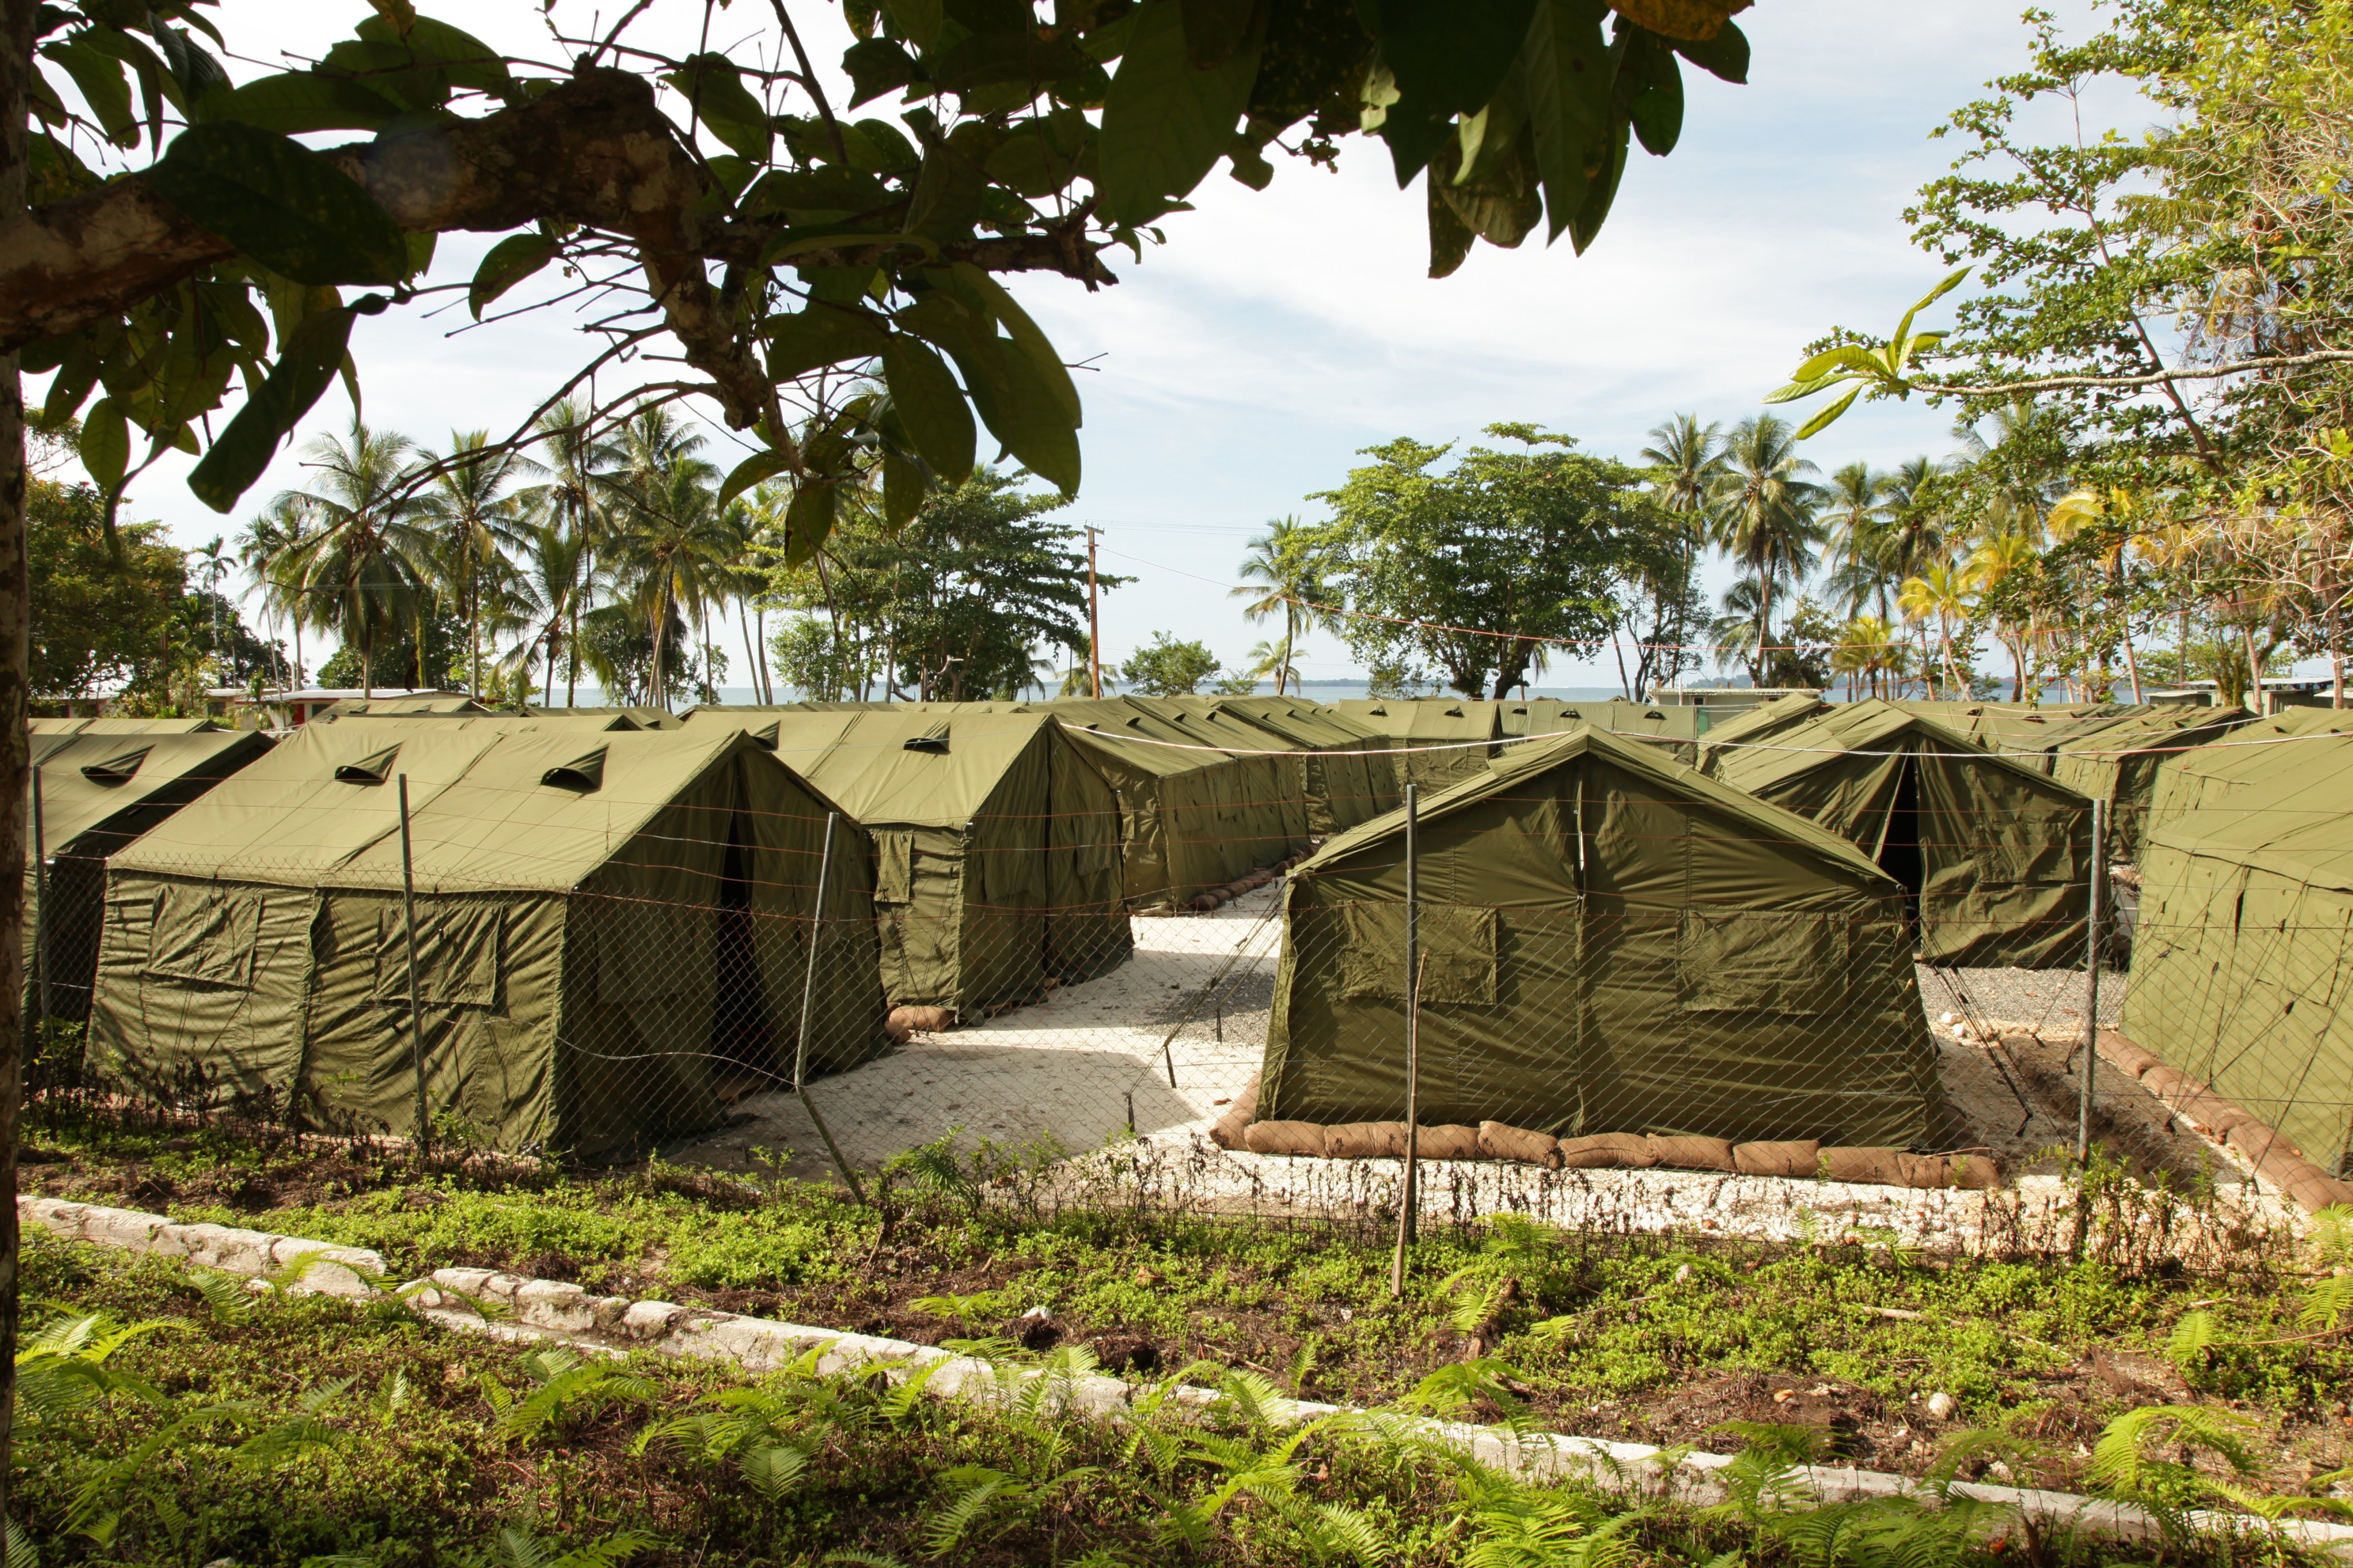 The Manus Island Regional Processing Facility, used to detain asylum seekers captured on Australia-bound boats, is seen on Oct. 16, 2012 on Manus Island, Papua New Guinea. (Getty Images)